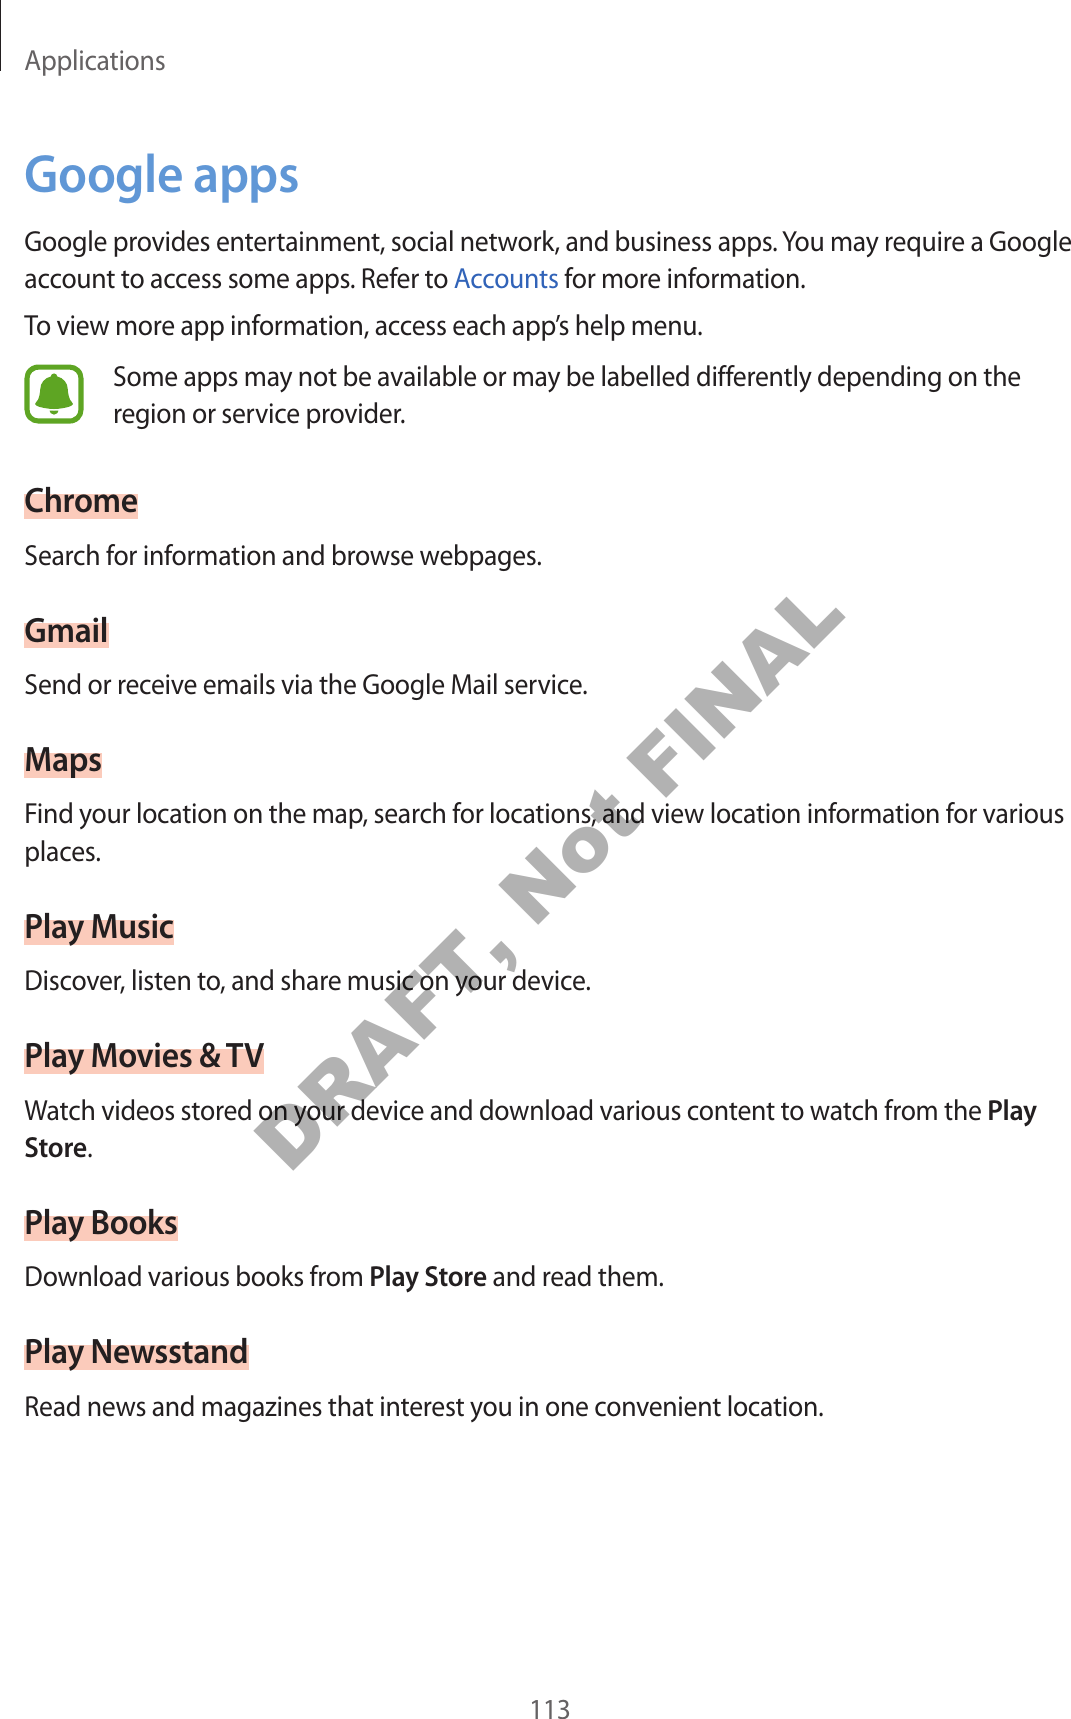 Applications113Google appsGoogle provides entertainment, social network, and business apps. You may require a Google account to access some apps. Refer to Accounts for more information.To view more app information, access each app’s help menu.Some apps may not be available or may be labelled differently depending on the region or service provider.ChromeSearch for information and browse webpages.GmailSend or receive emails via the Google Mail service.MapsFind your location on the map, search for locations, and view location information for various places.Play MusicDiscover, listen to, and share music on your device.Play Movies &amp; TVWatch videos stored on your device and download various content to watch from the Play Store.Play BooksDownload various books from Play Store and read them.Play NewsstandRead news and magazines that interest you in one convenient location.DRAFT, Not FINAL